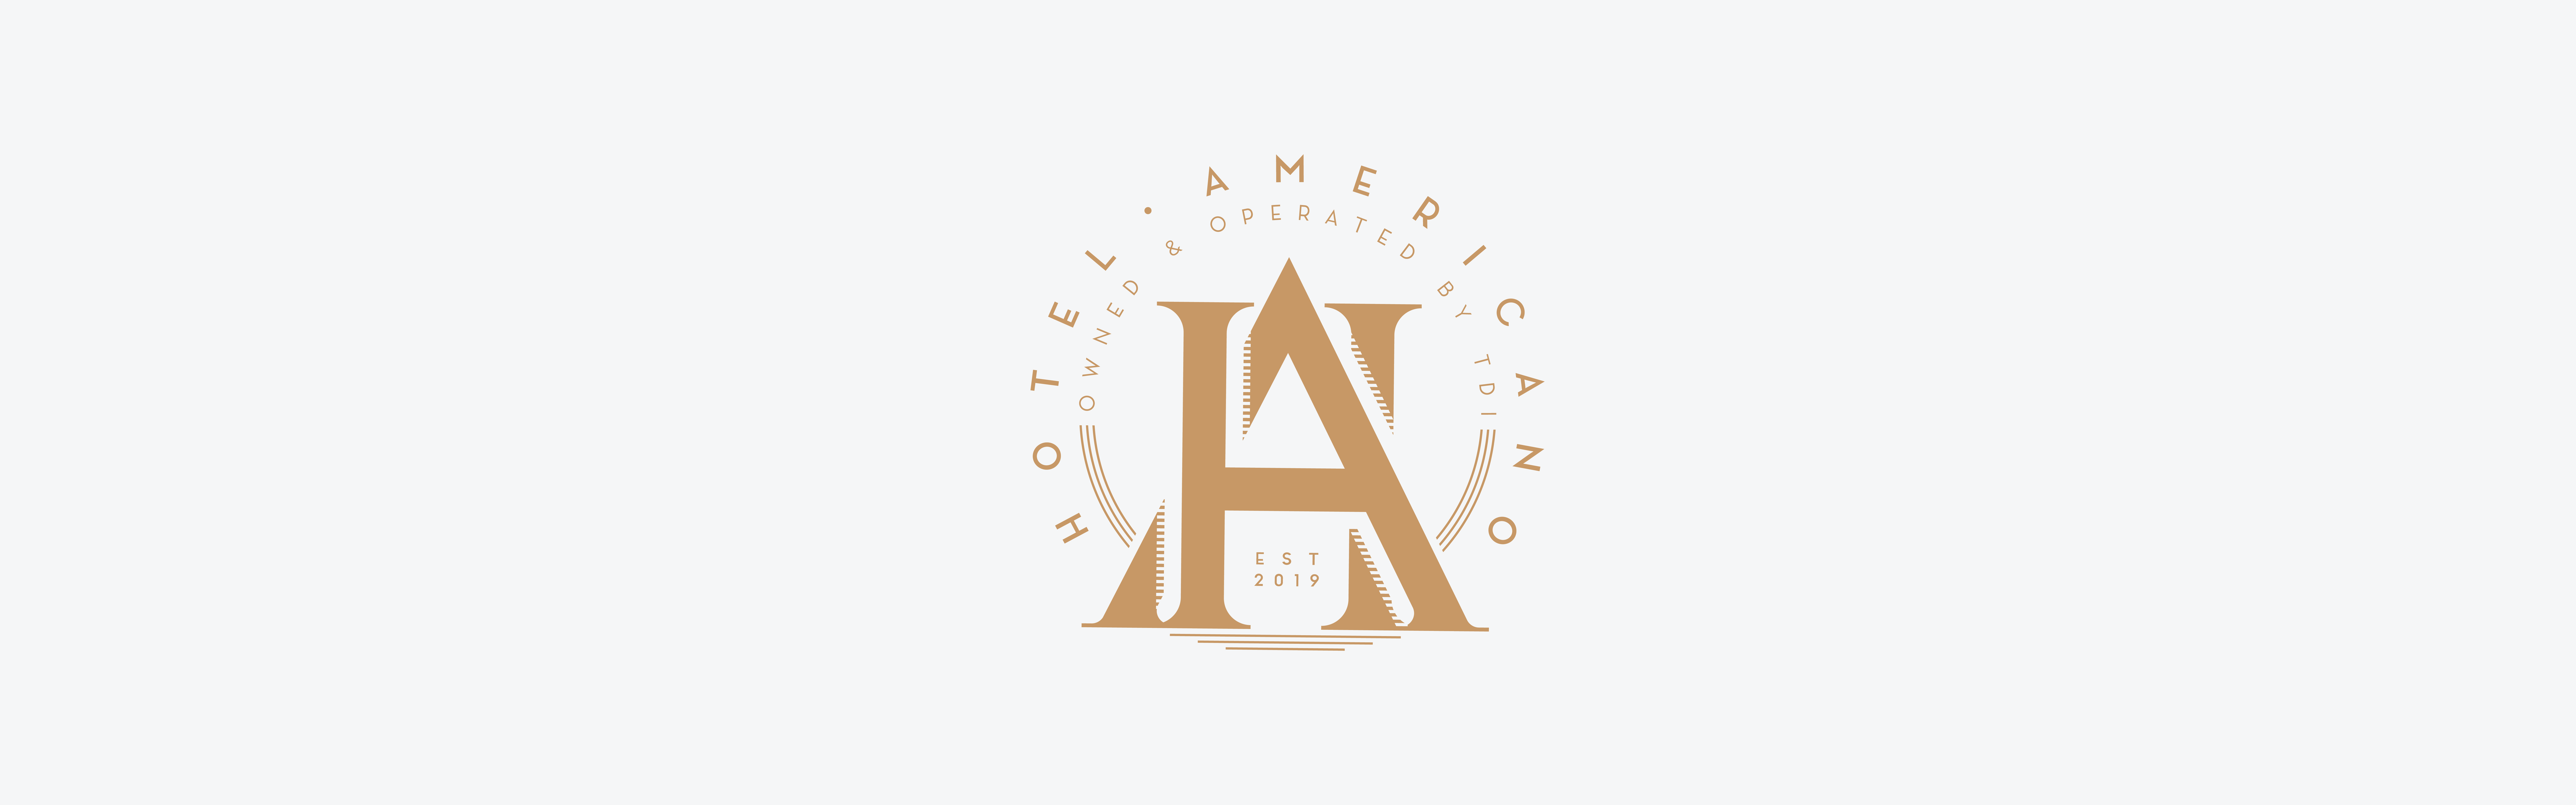 The image displays a graphic logo that features the letter 'a' stylized with what appears to be a grain shoot motif, and text arranged in a circular fashion around it, which reads "Hotel American